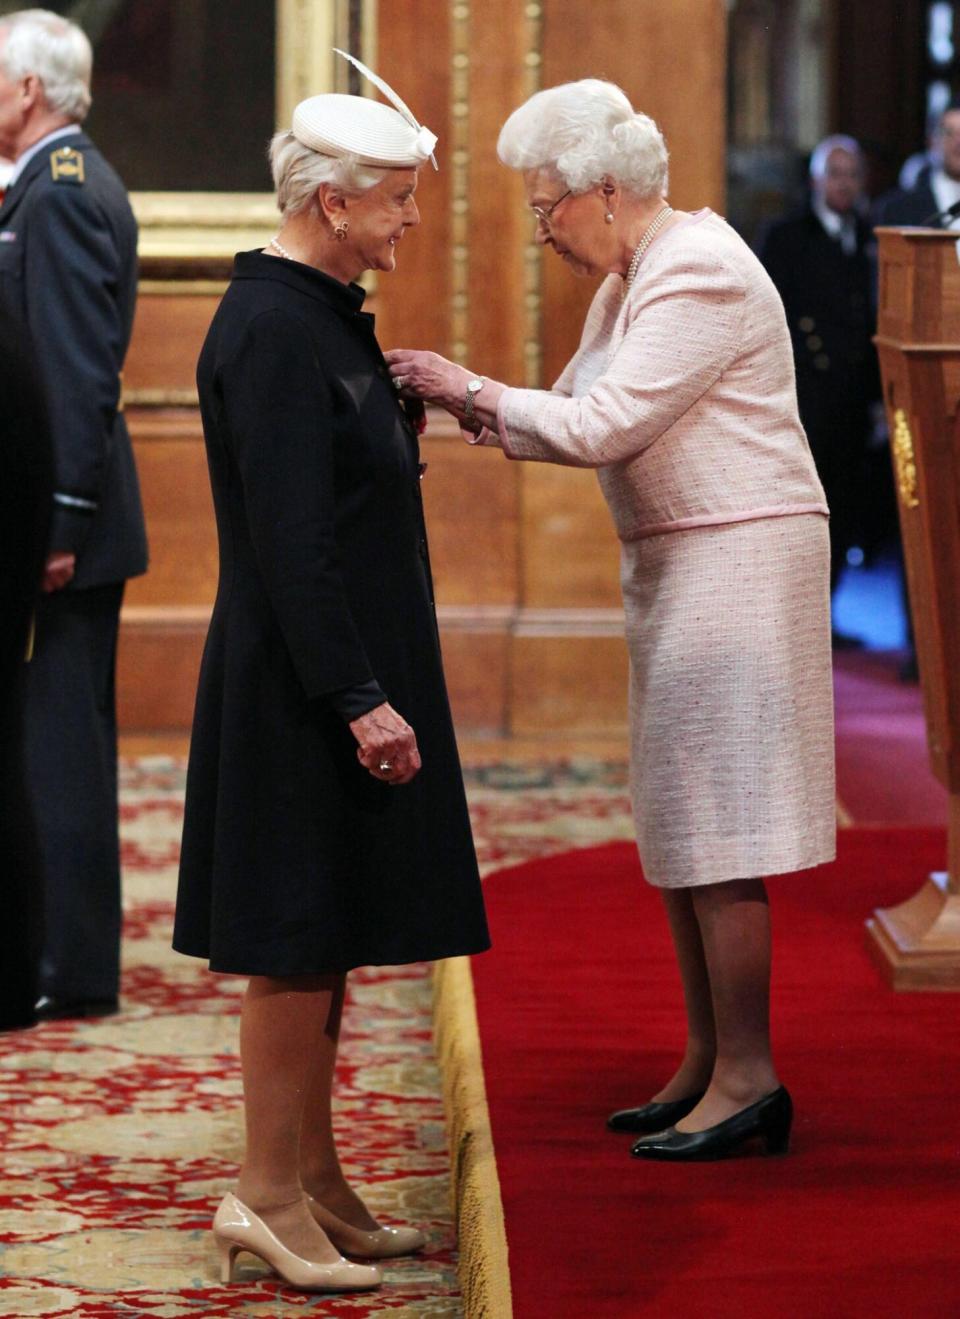 Angela Lansbury being made a Dame Commander by Queen Elizabeth II during an Investiture ceremony at Windsor Castle, Berkshire